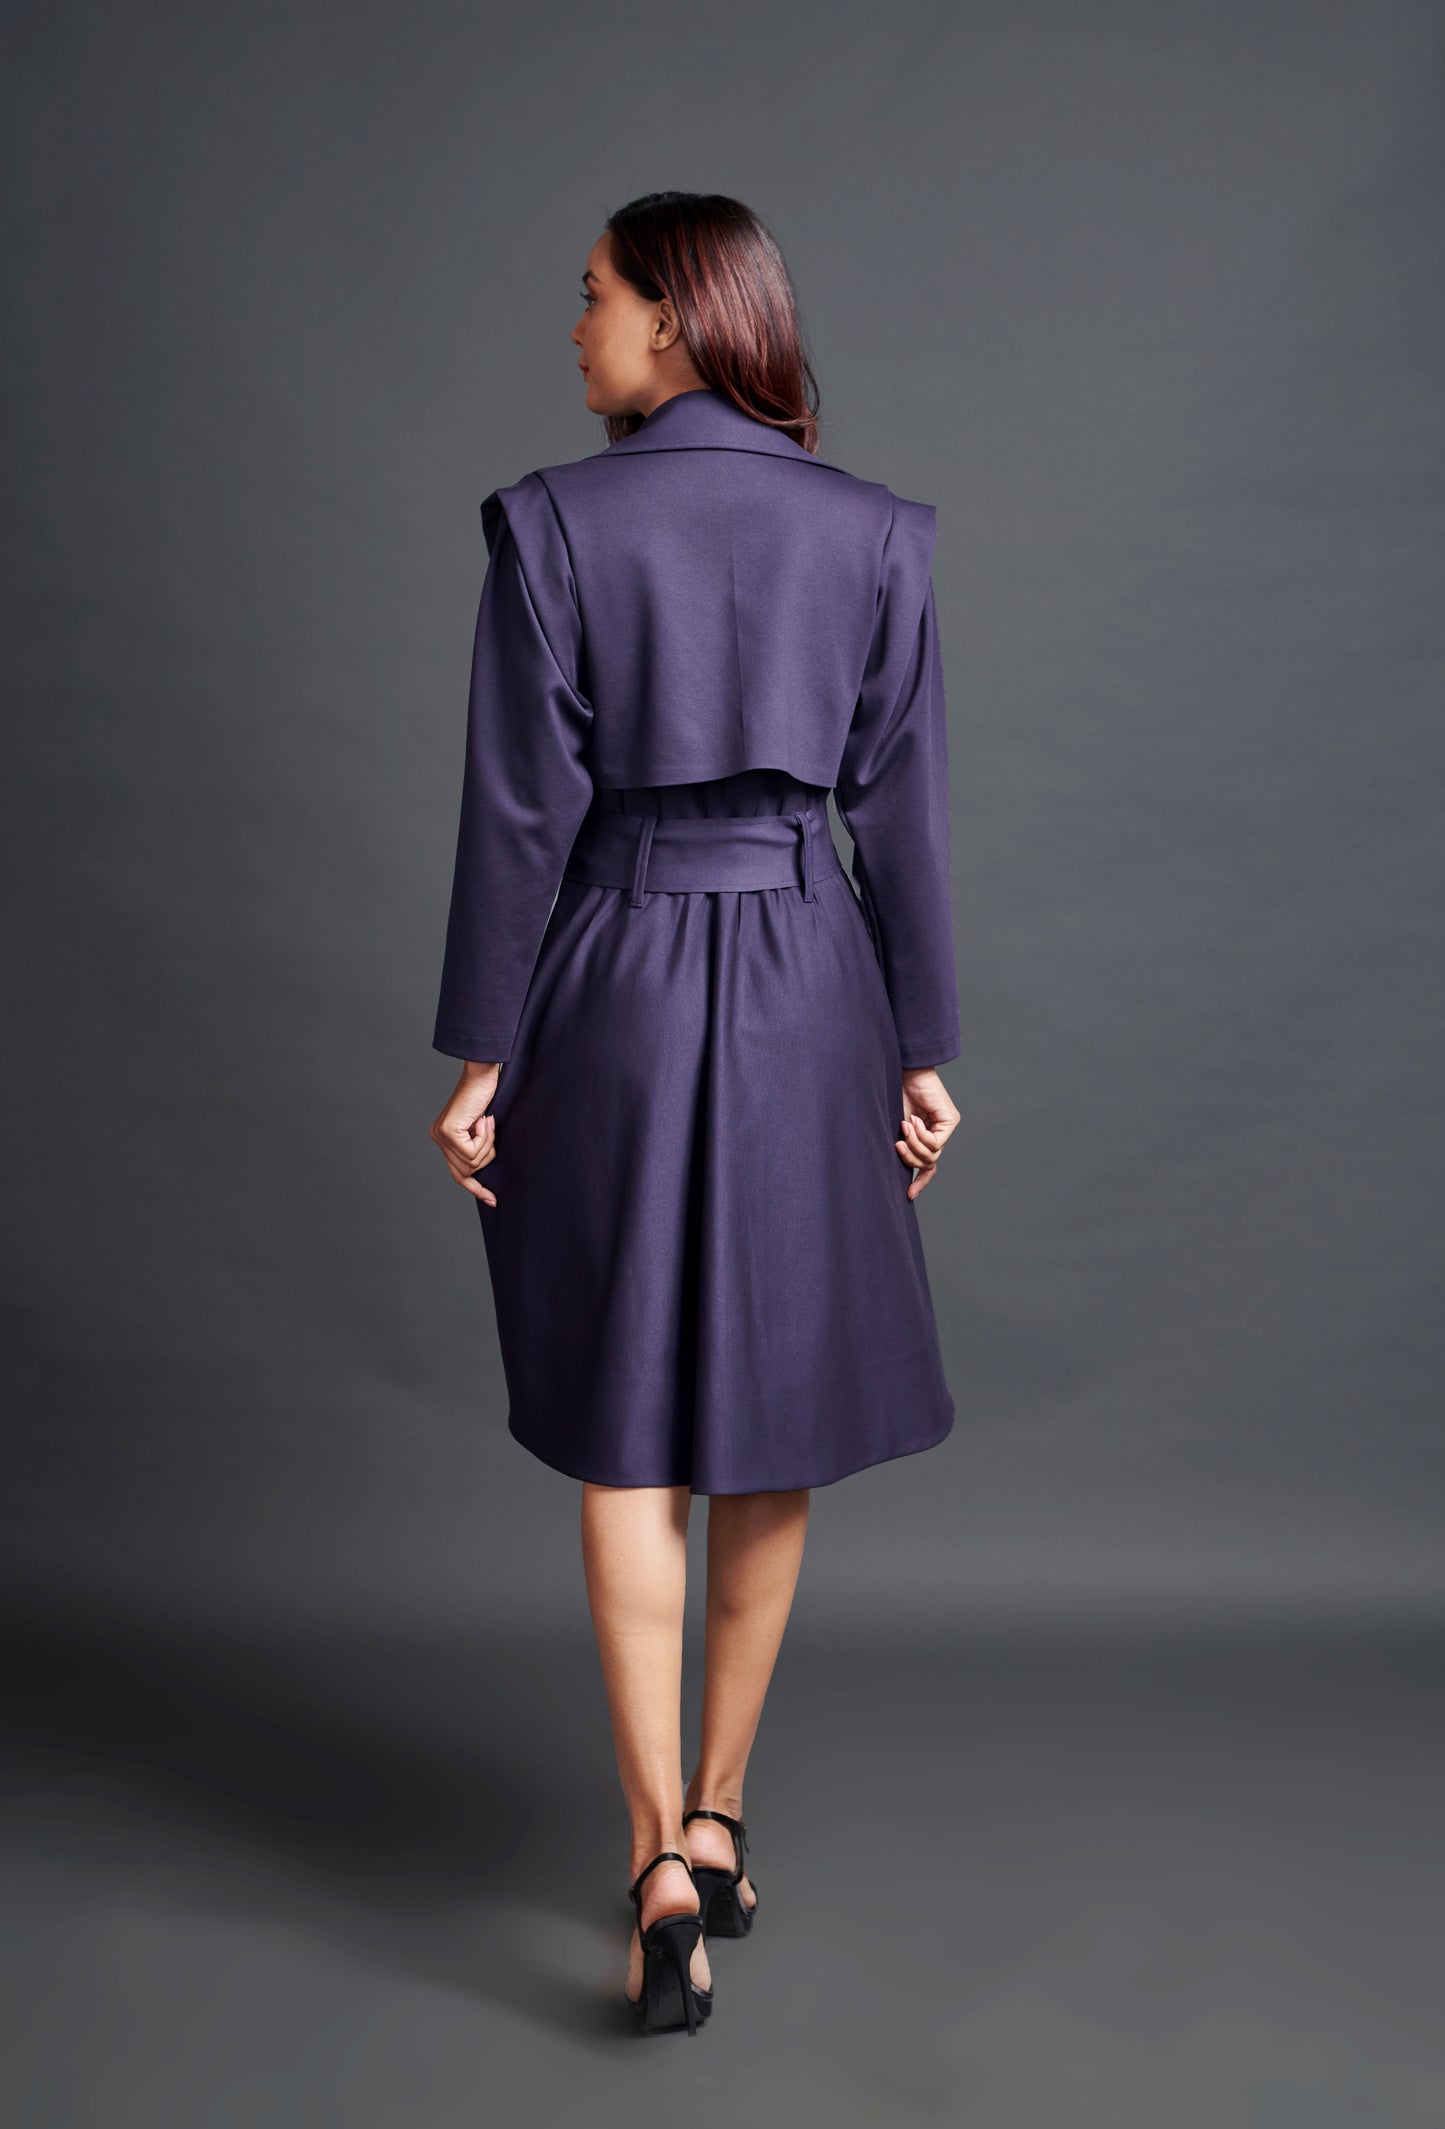 Image of PURPLE A SUMURAI INSPIRED JACKET DRESS WITH SASH BELT. From savoirfashions.com